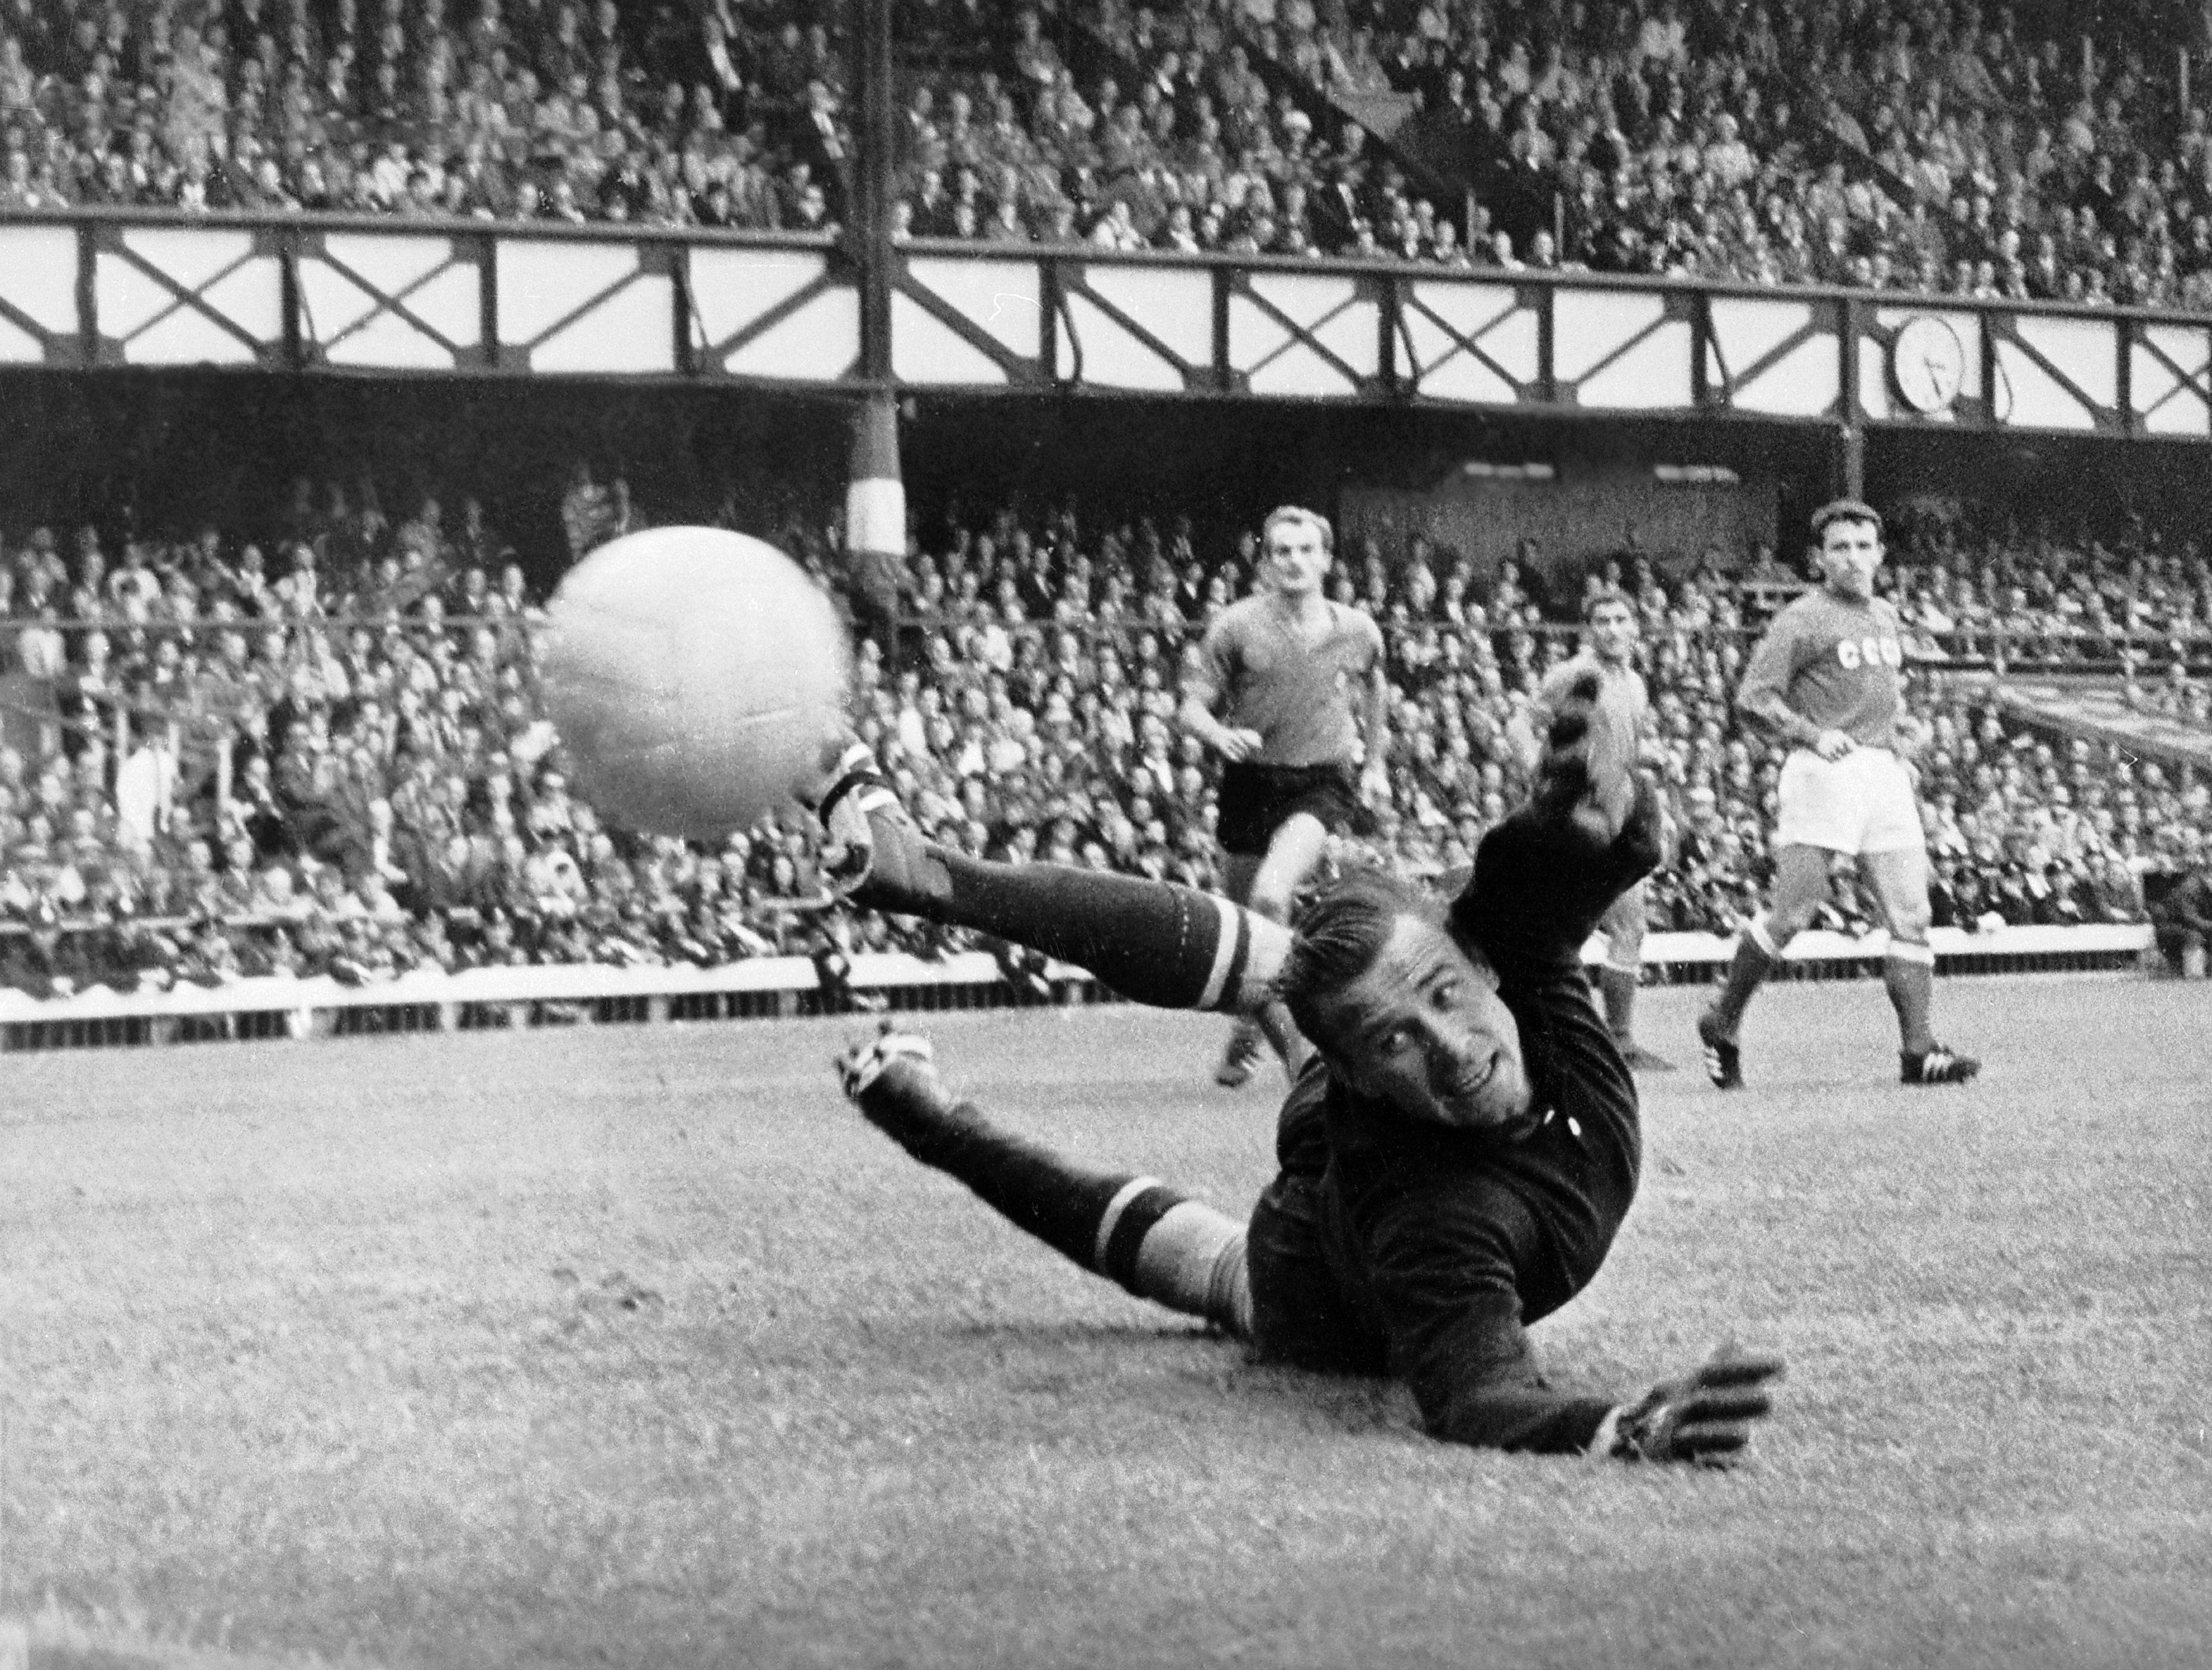 Lev Yashin in action for the Soviet Union at the 1966 World Cup.